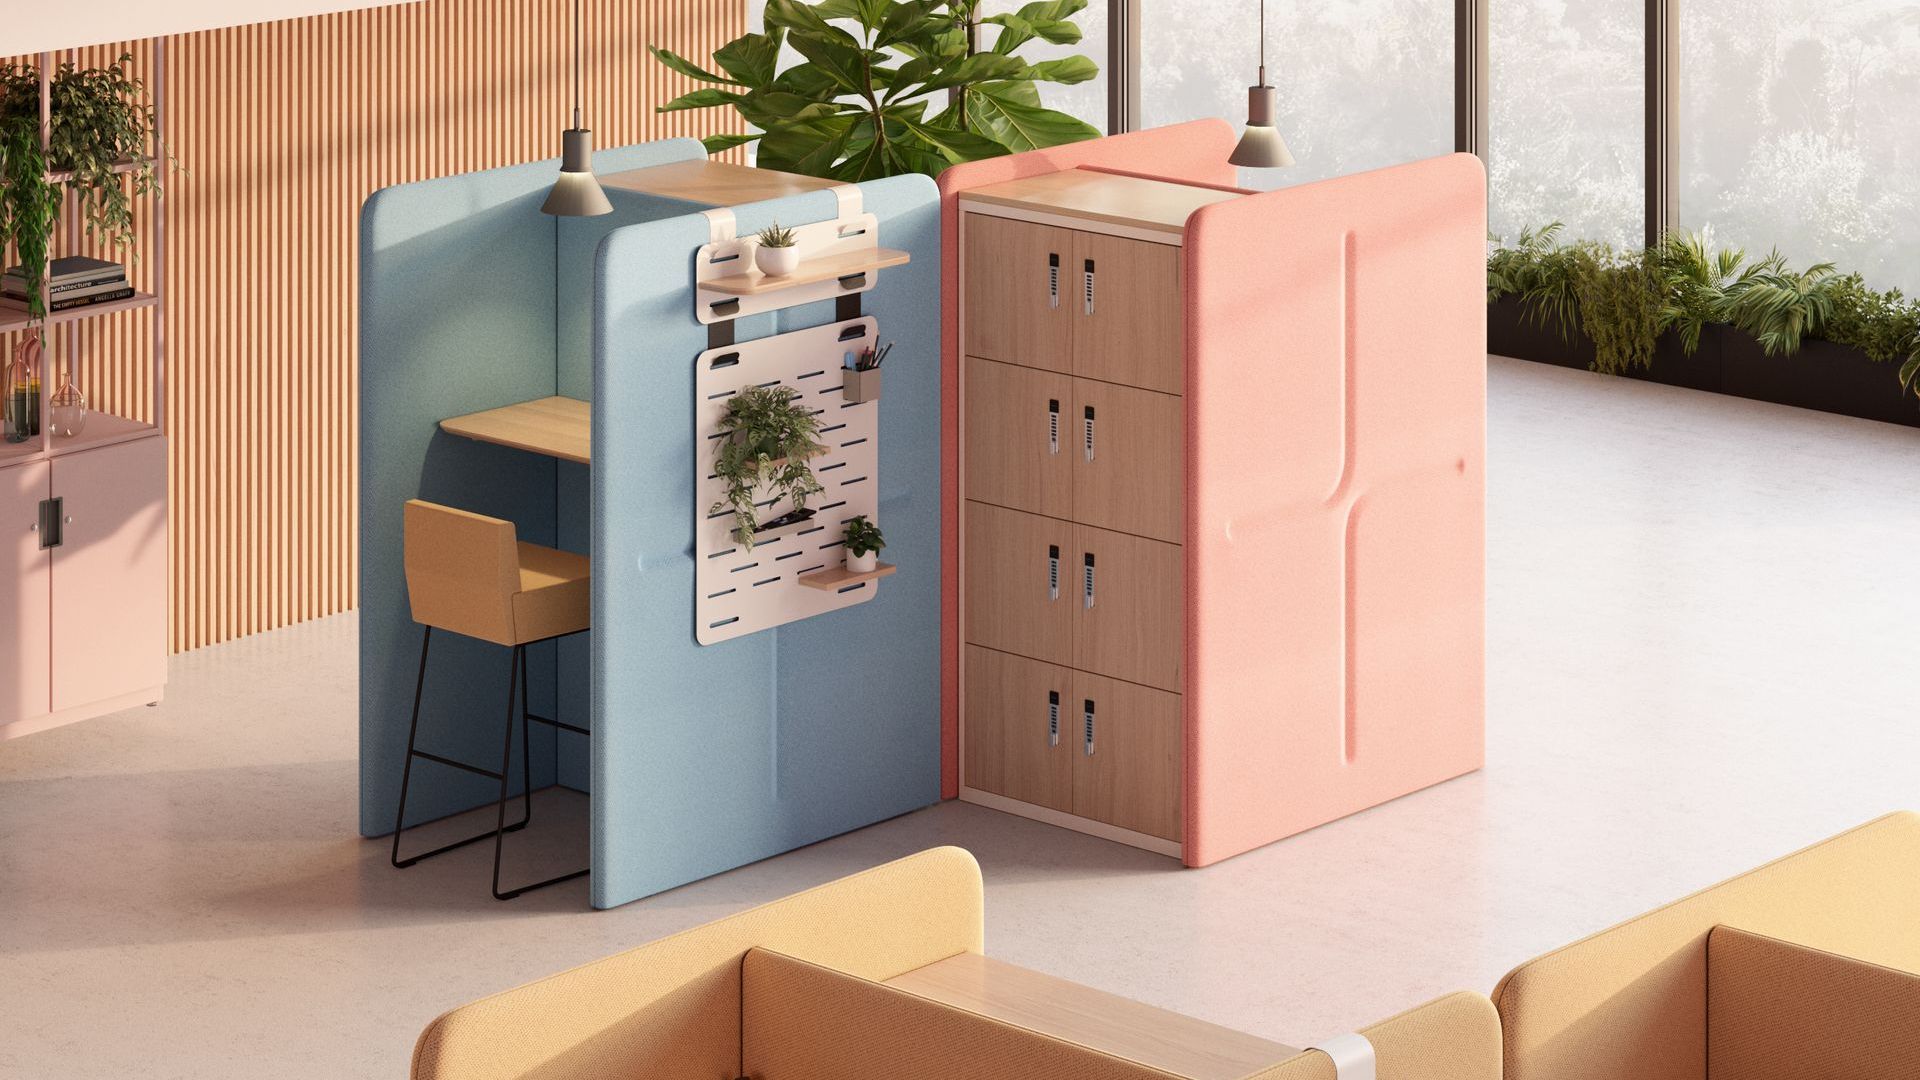 A peach storage unit sits next to a blue booth for private working. At the booth is a stool. The office is spacious and naturally-lit with greenery lining the walls.